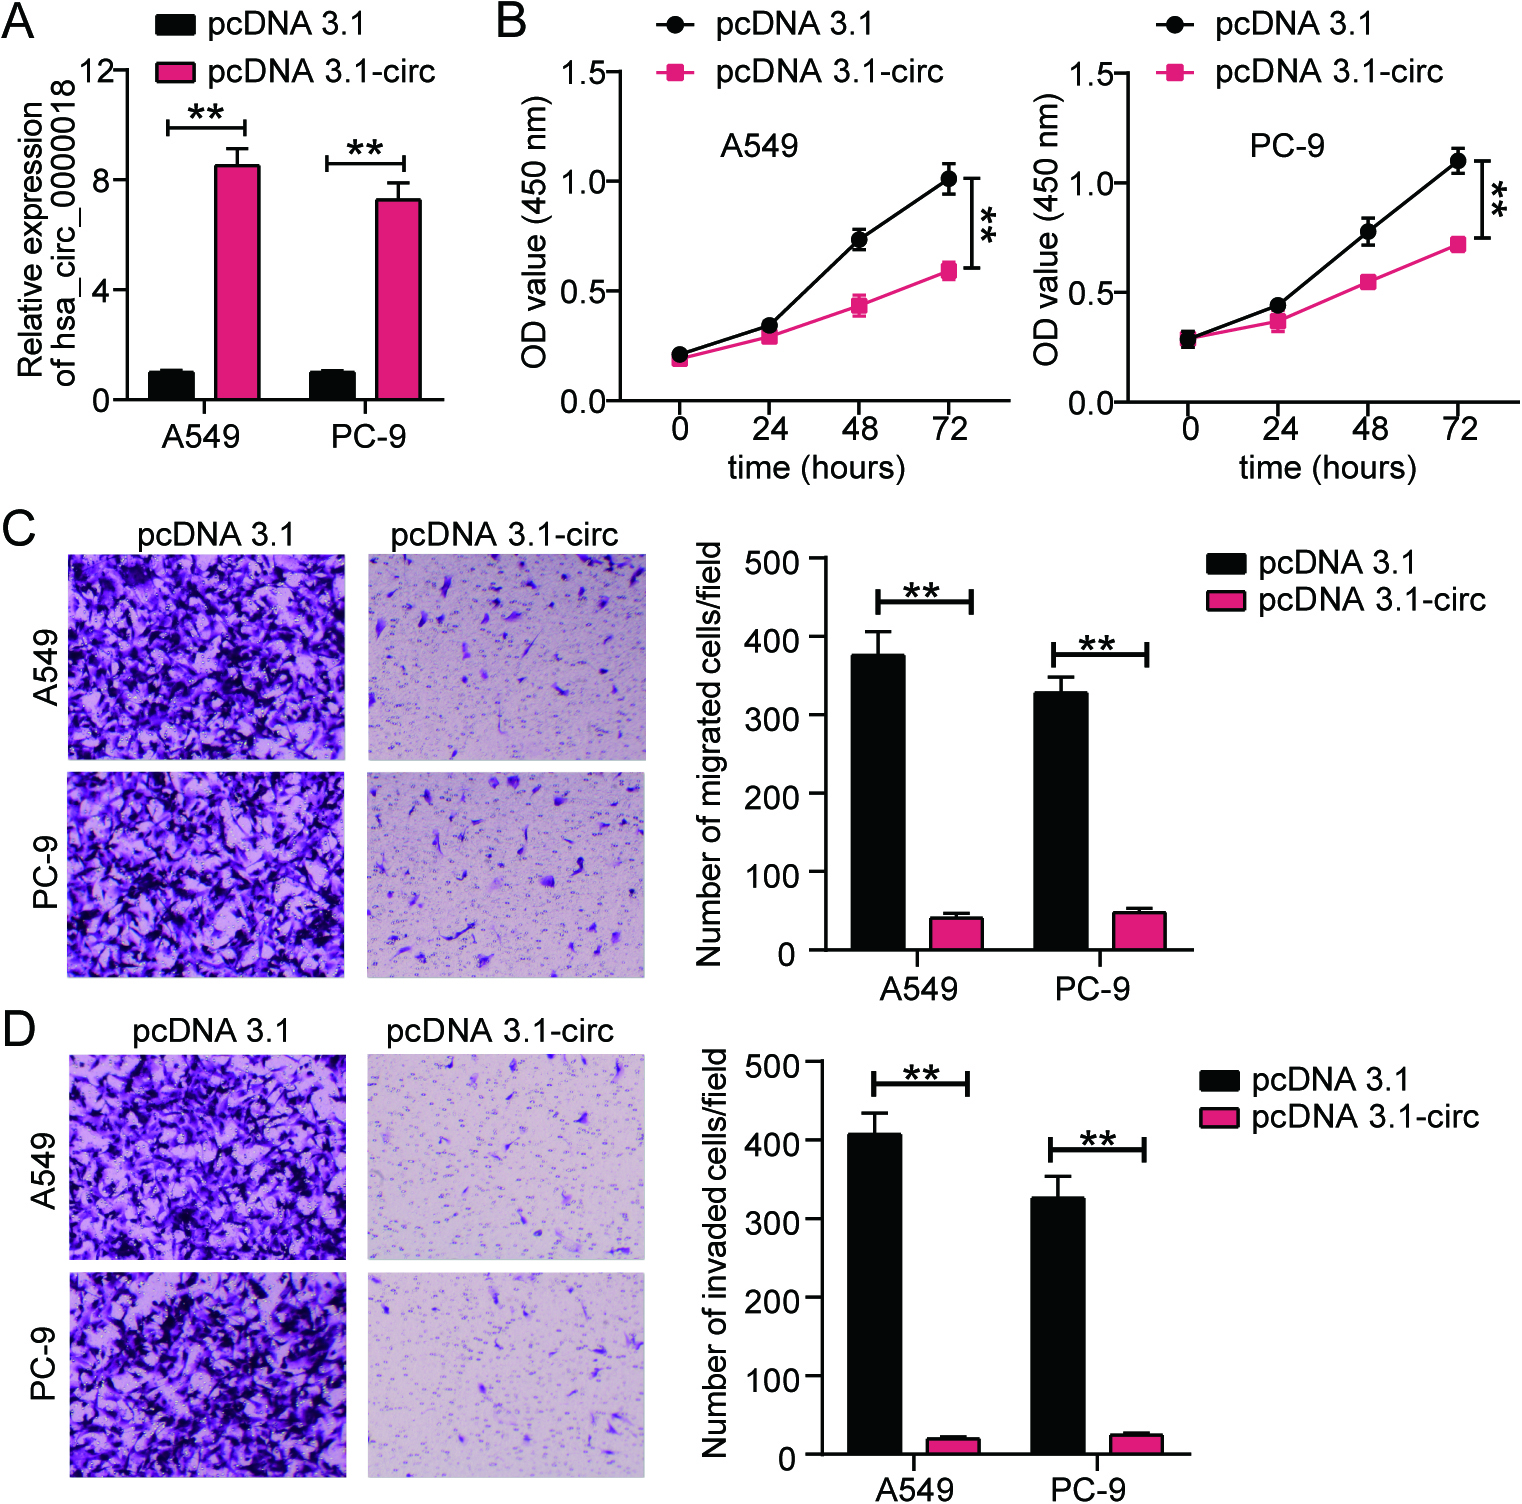 Hsa_circ_0000018 overexpression inhibits LA progression in vitro. (A) The transfection efficiency of pcDNA 3.1-circ was verified in LA cell lines (A549 and PC-9) using qRT-PCR. (B) The effect of pcDNA 3.1-circ transfection on cell proliferation was assessed using the CCK8 assay in LA cells. (C-D) The migration and invasion abilities of LA cells were evaluated using Transwell assays after transfection with pcDNA 3.1-circ to determine the effect of hsa_circ_0000018 on cell migration (C) and invasion (D). **P < 0.01.